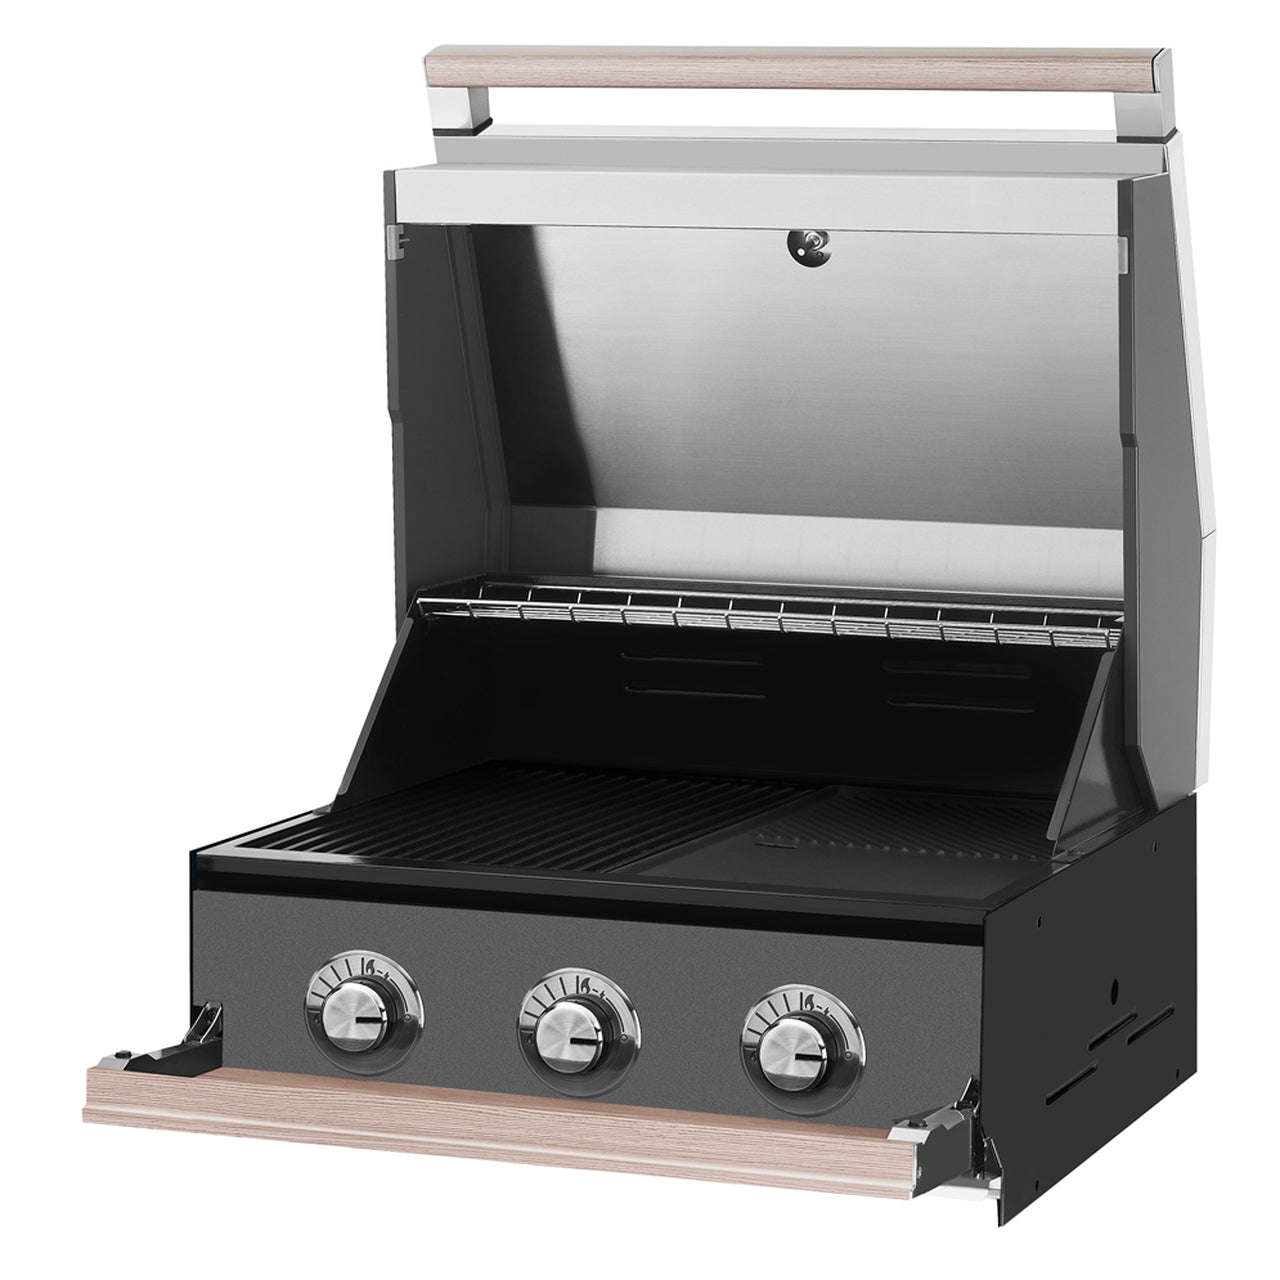 Beefeater Discovery 1500 Built-in 3 Burner Gas Bbq